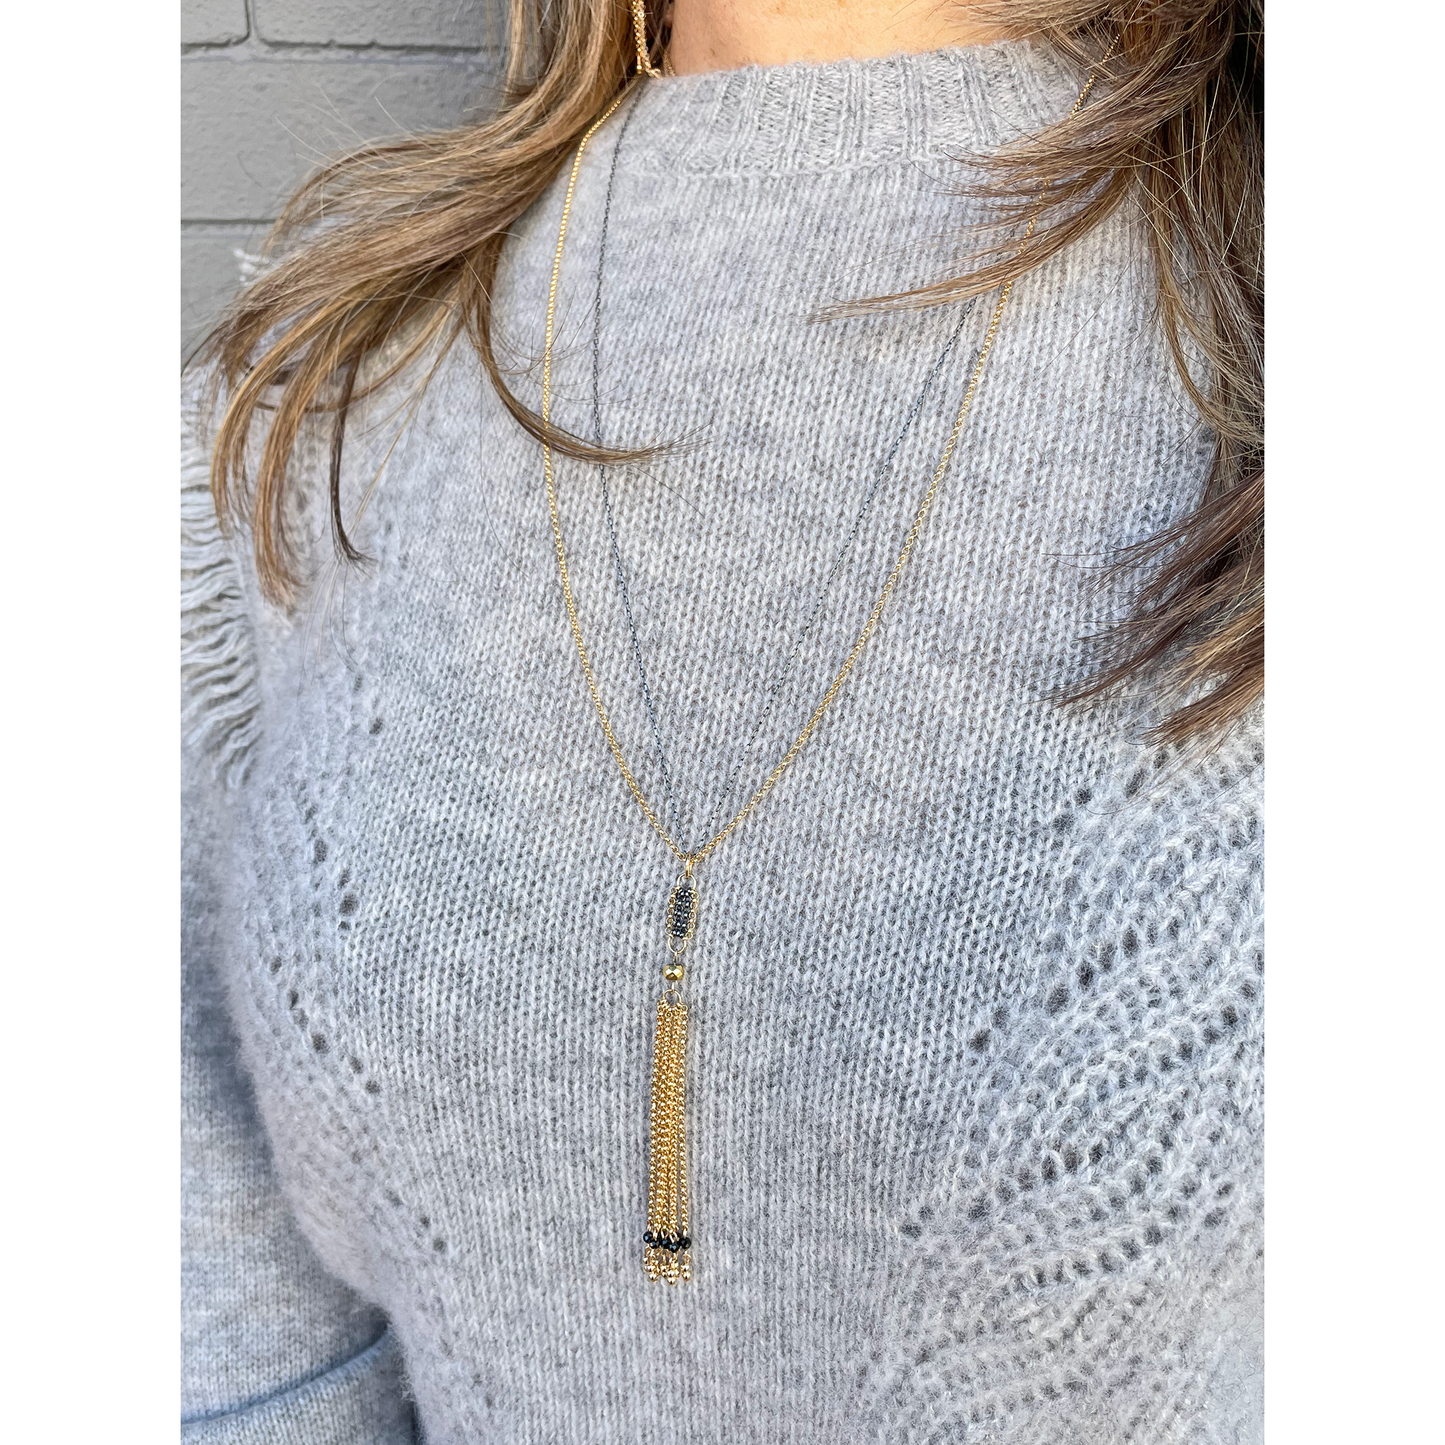 Black + Gold Tassel Necklace with Black Spinel Accents